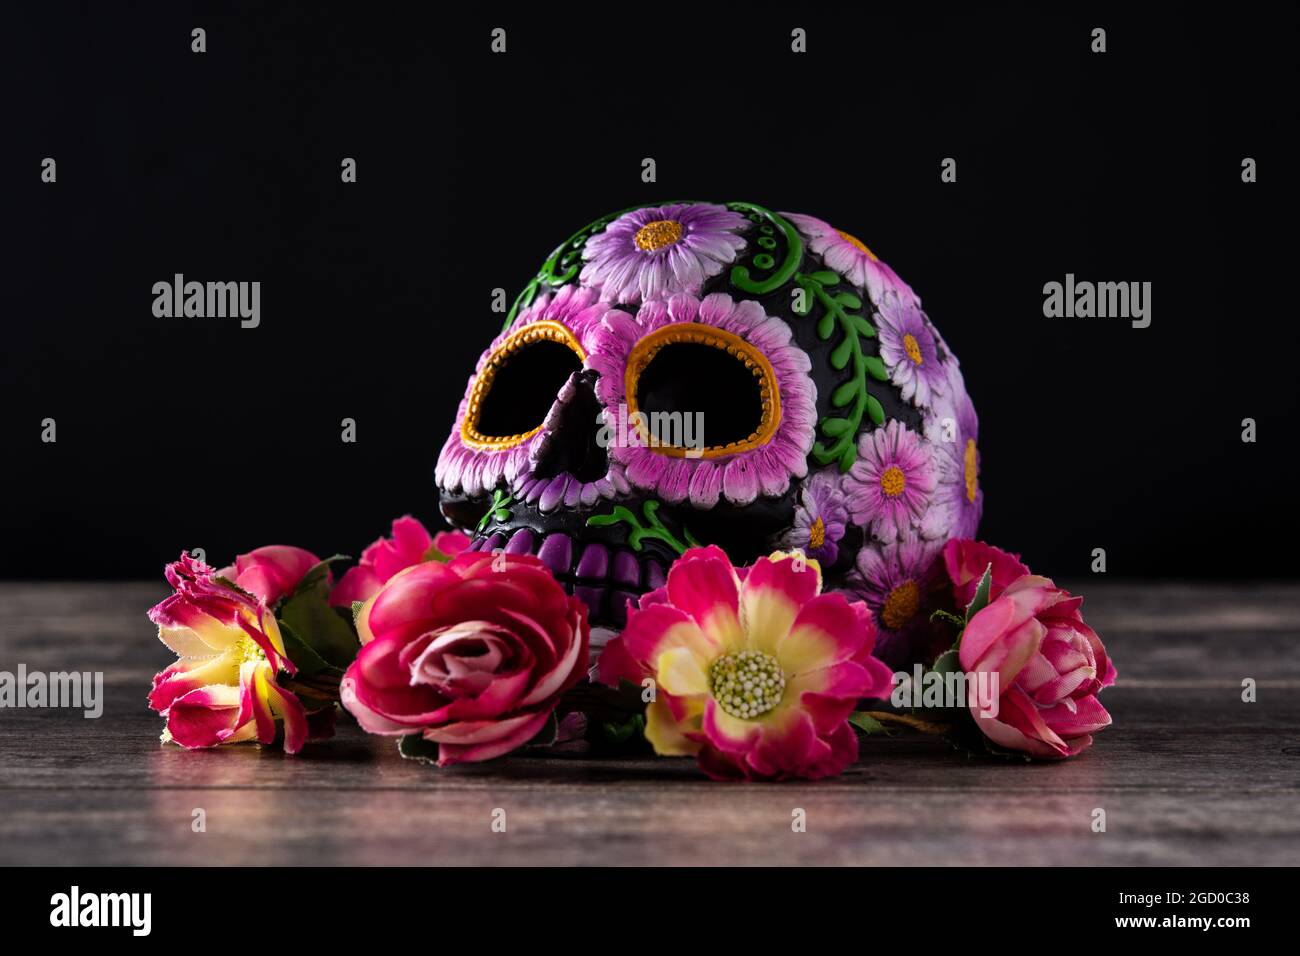 Typical Mexican skull and flowers diadem on black background. Dia de los muertos. Stock Photo